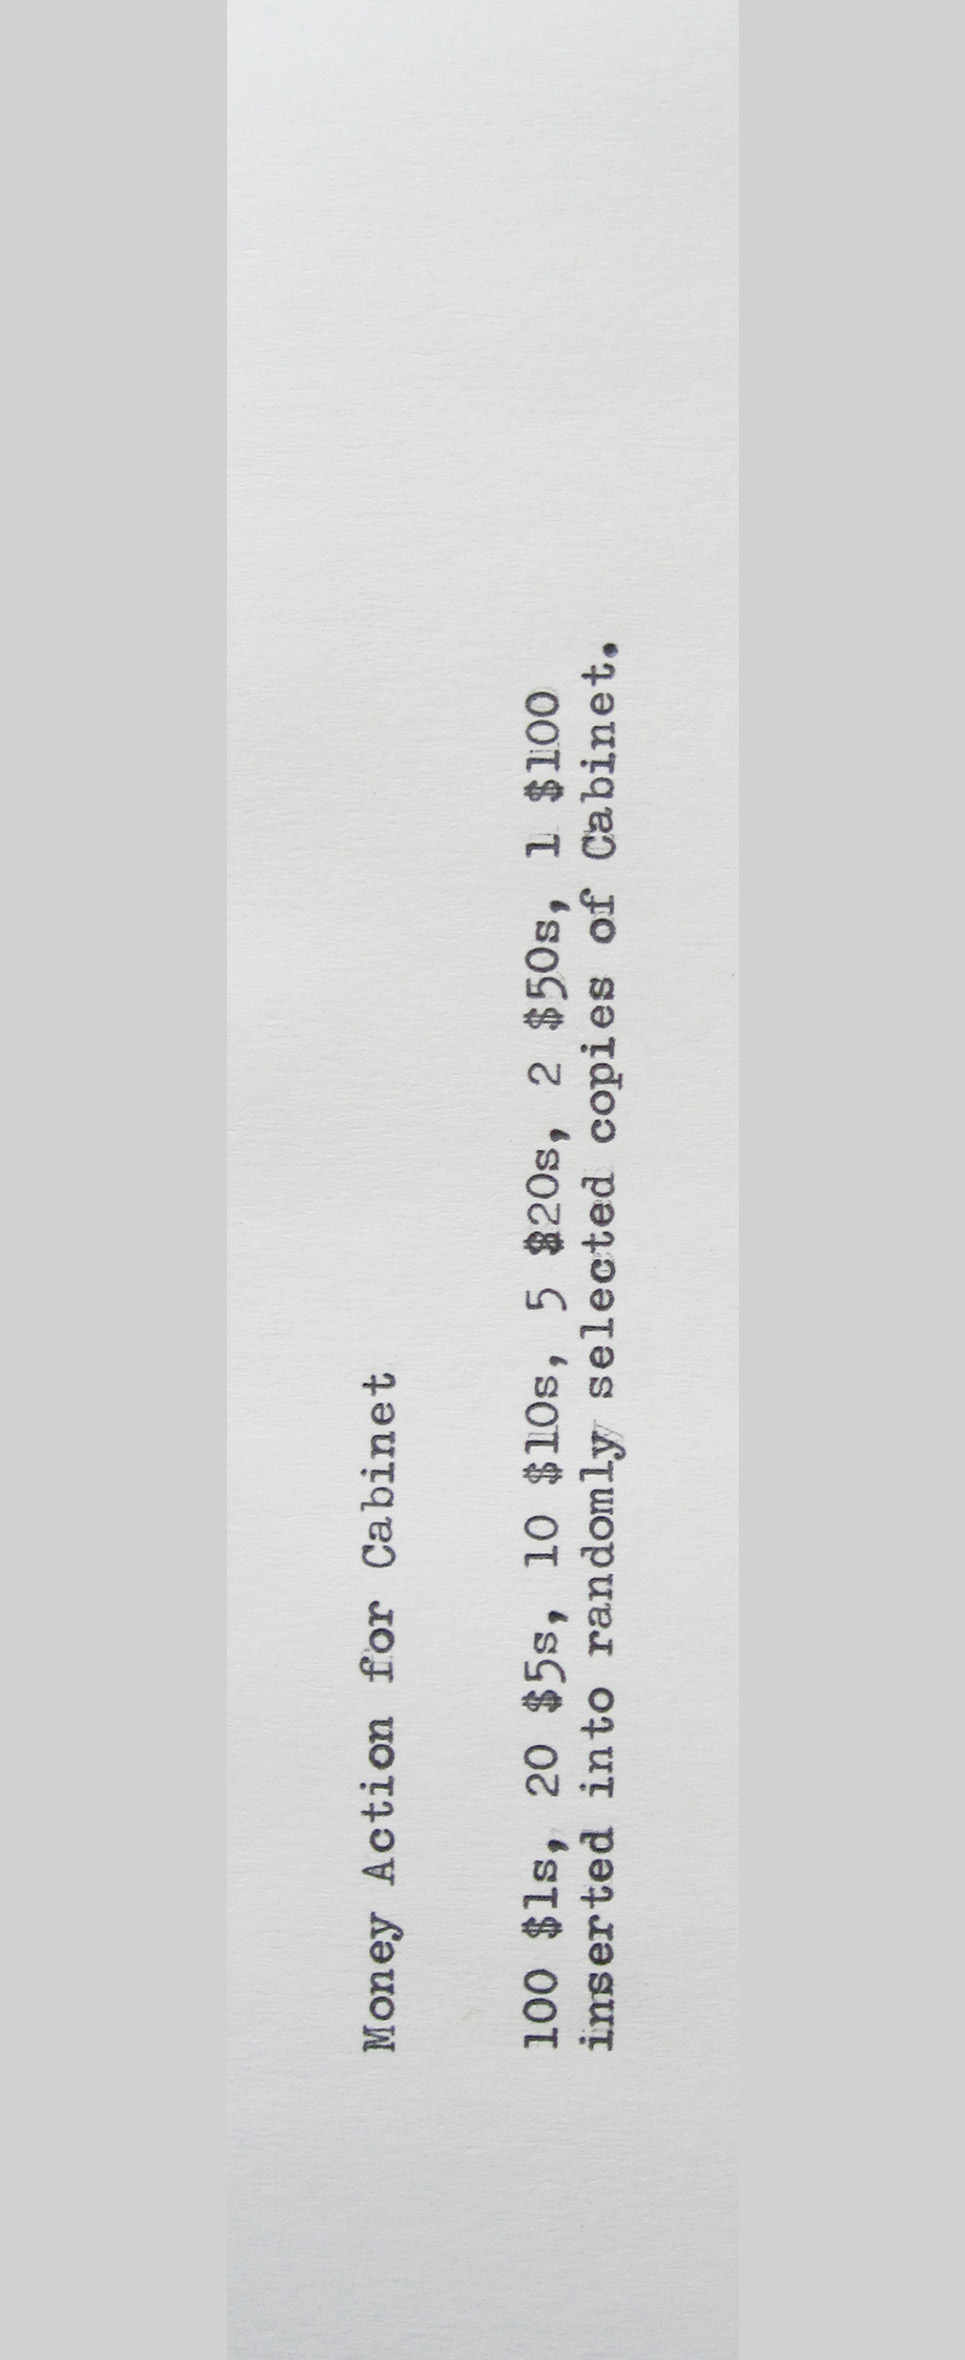 A bookmark by Sal Randolph depicting a typewritten tally of the 1,5,10,50, and 100 dollar bills inserted into randomly selected copies of Cabinet during his piece titled ”Money Action for Cabinet two.”